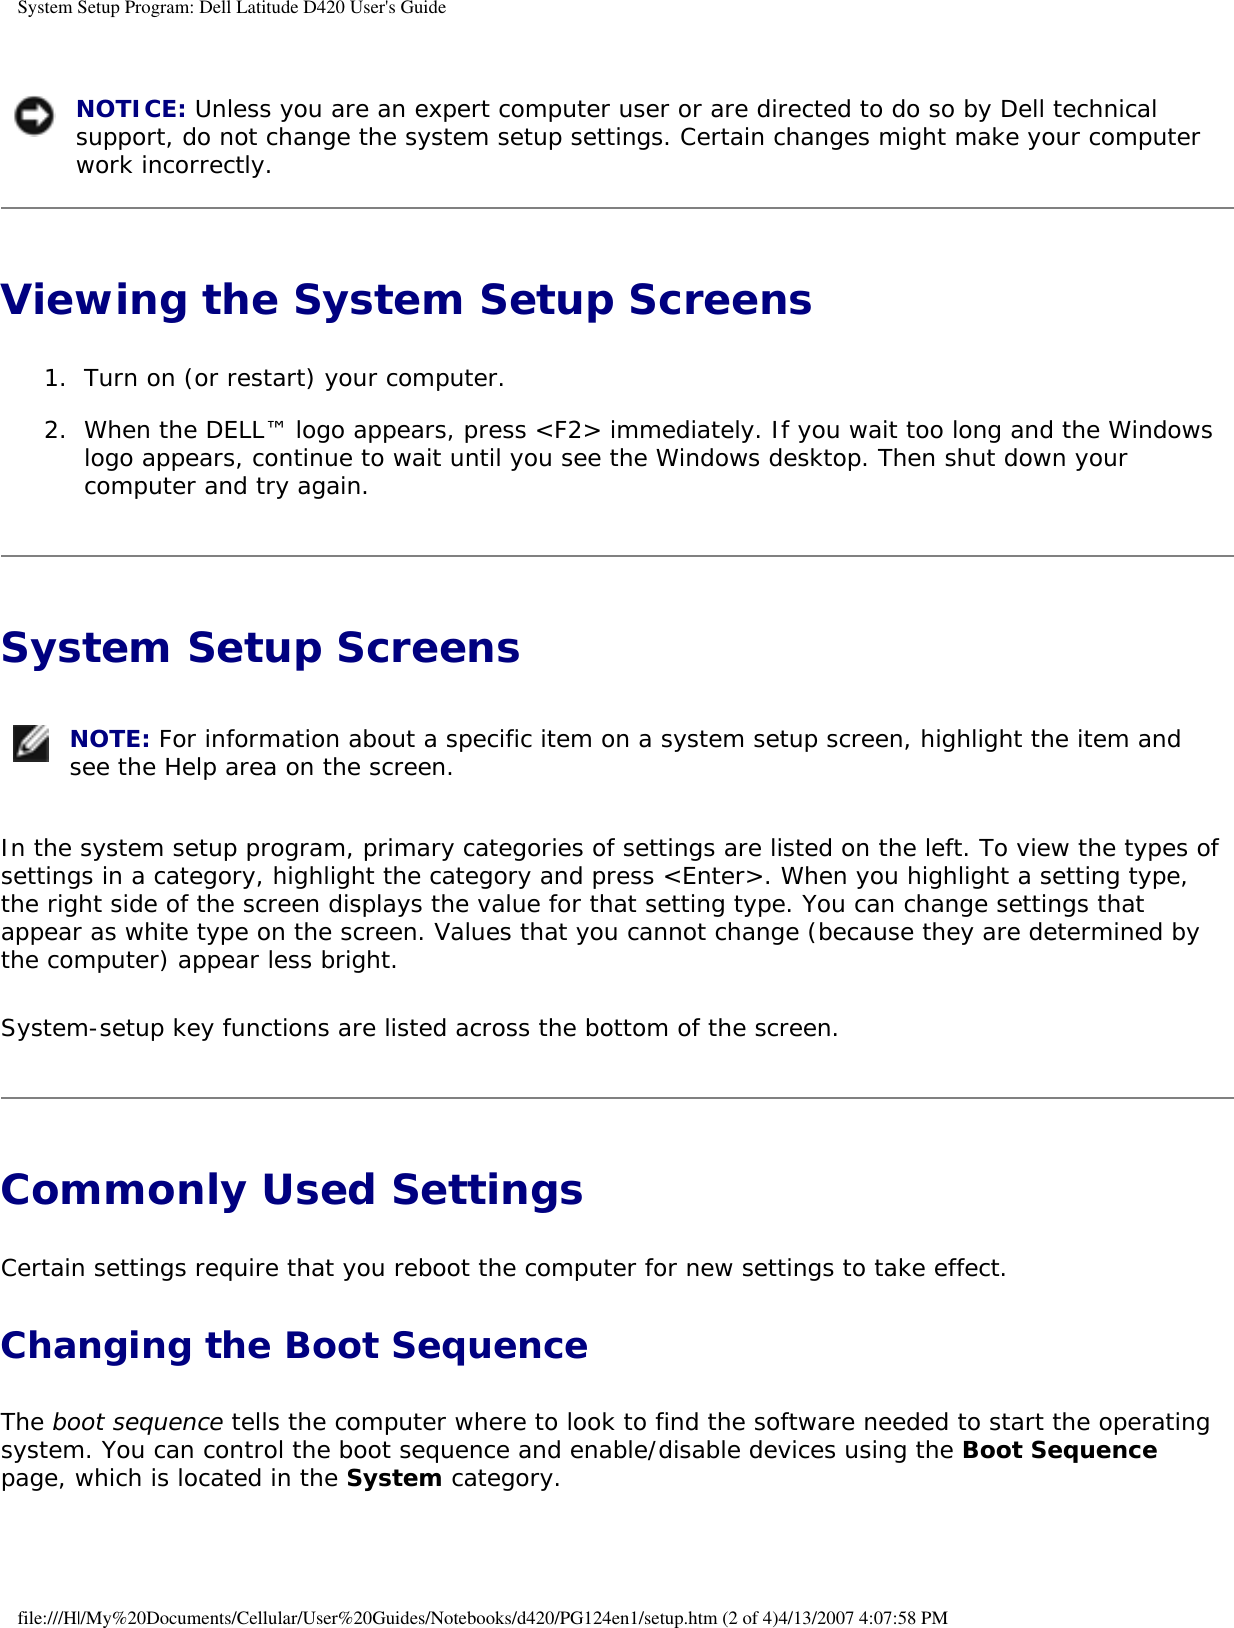 System Setup Program: Dell Latitude D420 User&apos;s Guide  NOTICE: Unless you are an expert computer user or are directed to do so by Dell technical support, do not change the system setup settings. Certain changes might make your computer work incorrectly. Viewing the System Setup Screens 1.  Turn on (or restart) your computer.   2.  When the DELL™ logo appears, press &lt;F2&gt; immediately. If you wait too long and the Windows logo appears, continue to wait until you see the Windows desktop. Then shut down your computer and try again.   System Setup Screens  NOTE: For information about a specific item on a system setup screen, highlight the item and see the Help area on the screen. In the system setup program, primary categories of settings are listed on the left. To view the types of settings in a category, highlight the category and press &lt;Enter&gt;. When you highlight a setting type, the right side of the screen displays the value for that setting type. You can change settings that appear as white type on the screen. Values that you cannot change (because they are determined by the computer) appear less bright.System-setup key functions are listed across the bottom of the screen.Commonly Used Settings Certain settings require that you reboot the computer for new settings to take effect.Changing the Boot SequenceThe boot sequence tells the computer where to look to find the software needed to start the operating system. You can control the boot sequence and enable/disable devices using the Boot Sequence page, which is located in the System category.file:///H|/My%20Documents/Cellular/User%20Guides/Notebooks/d420/PG124en1/setup.htm (2 of 4)4/13/2007 4:07:58 PM